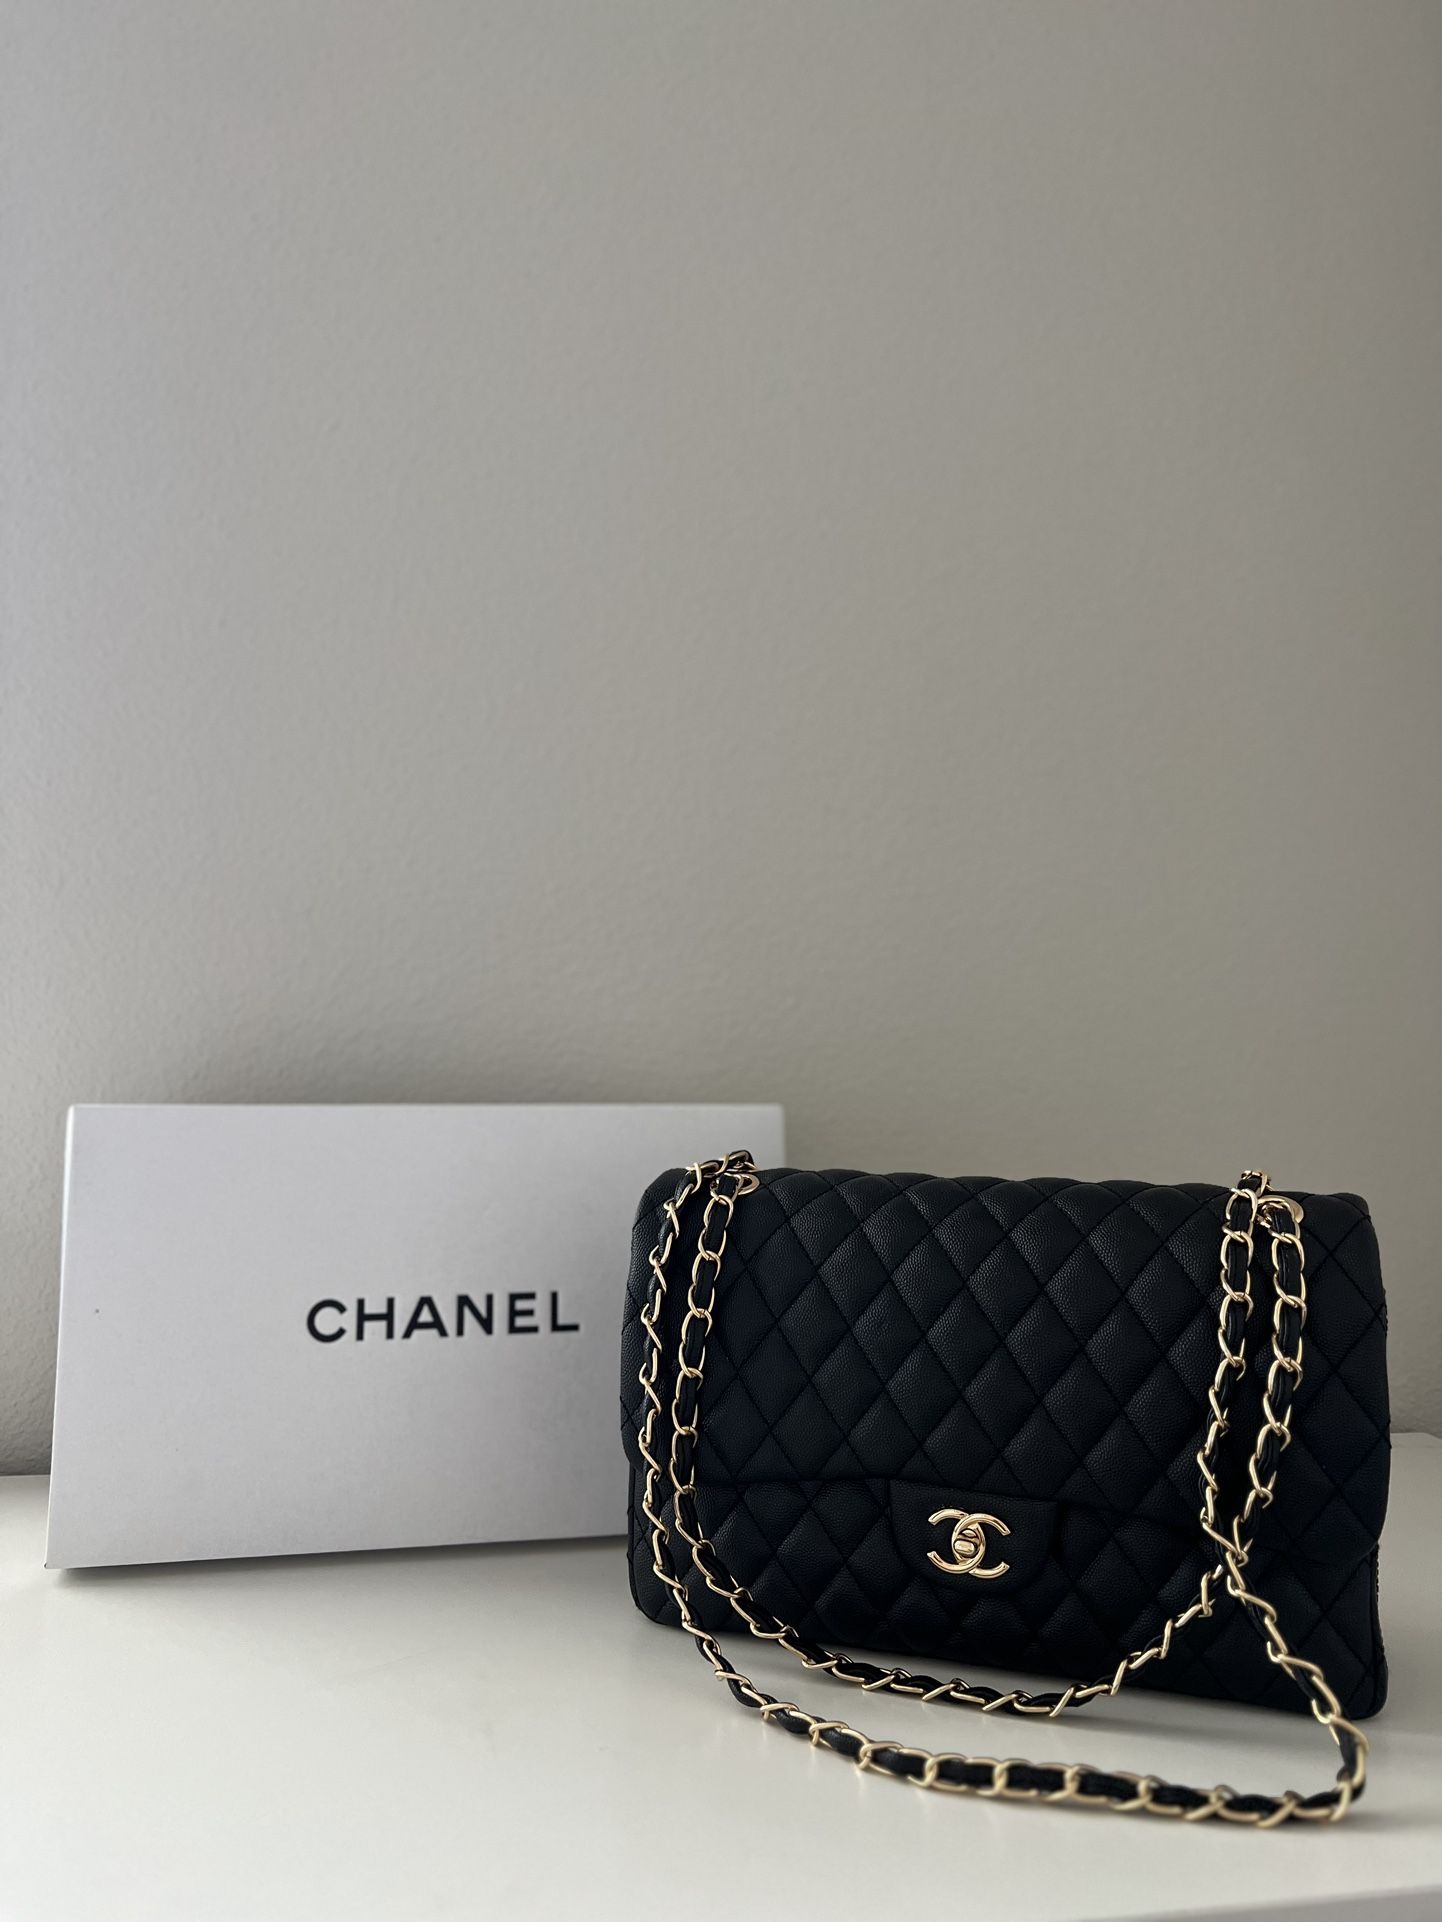 BRAND NEW CHANEL BAG WITH TAGS 